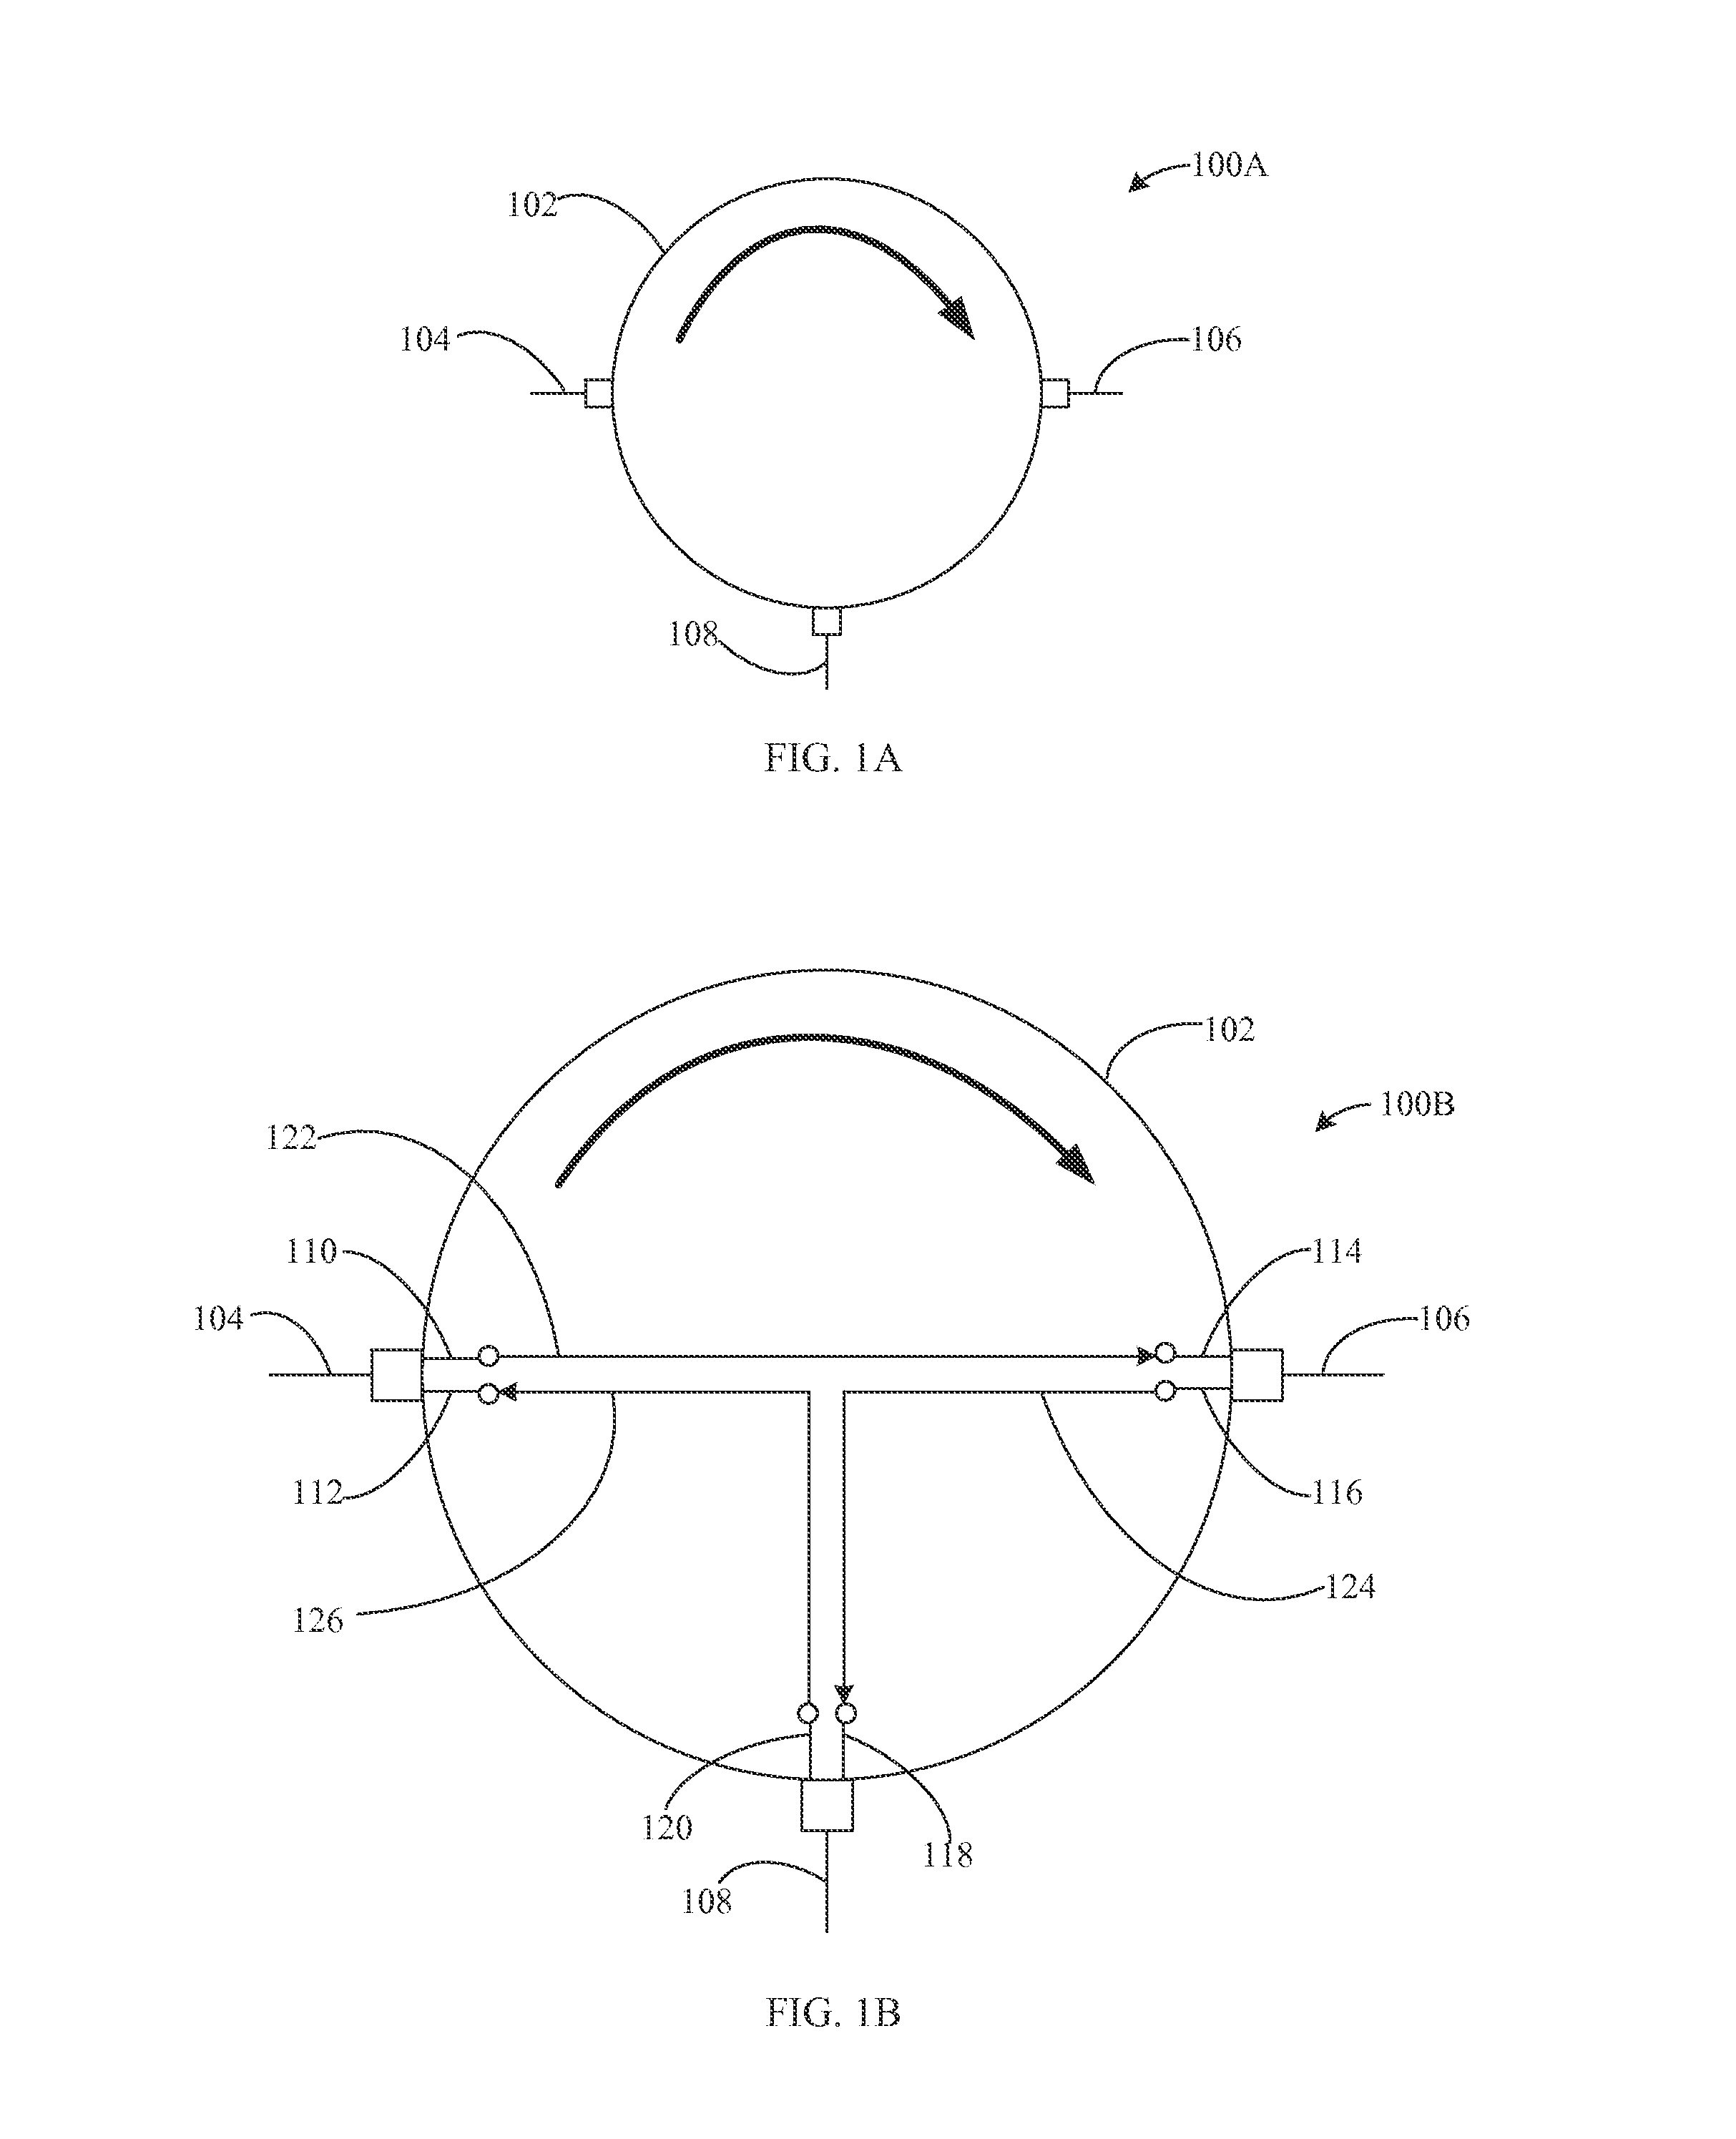 Mcm integration and power amplifier matching of non-reciprocal devices